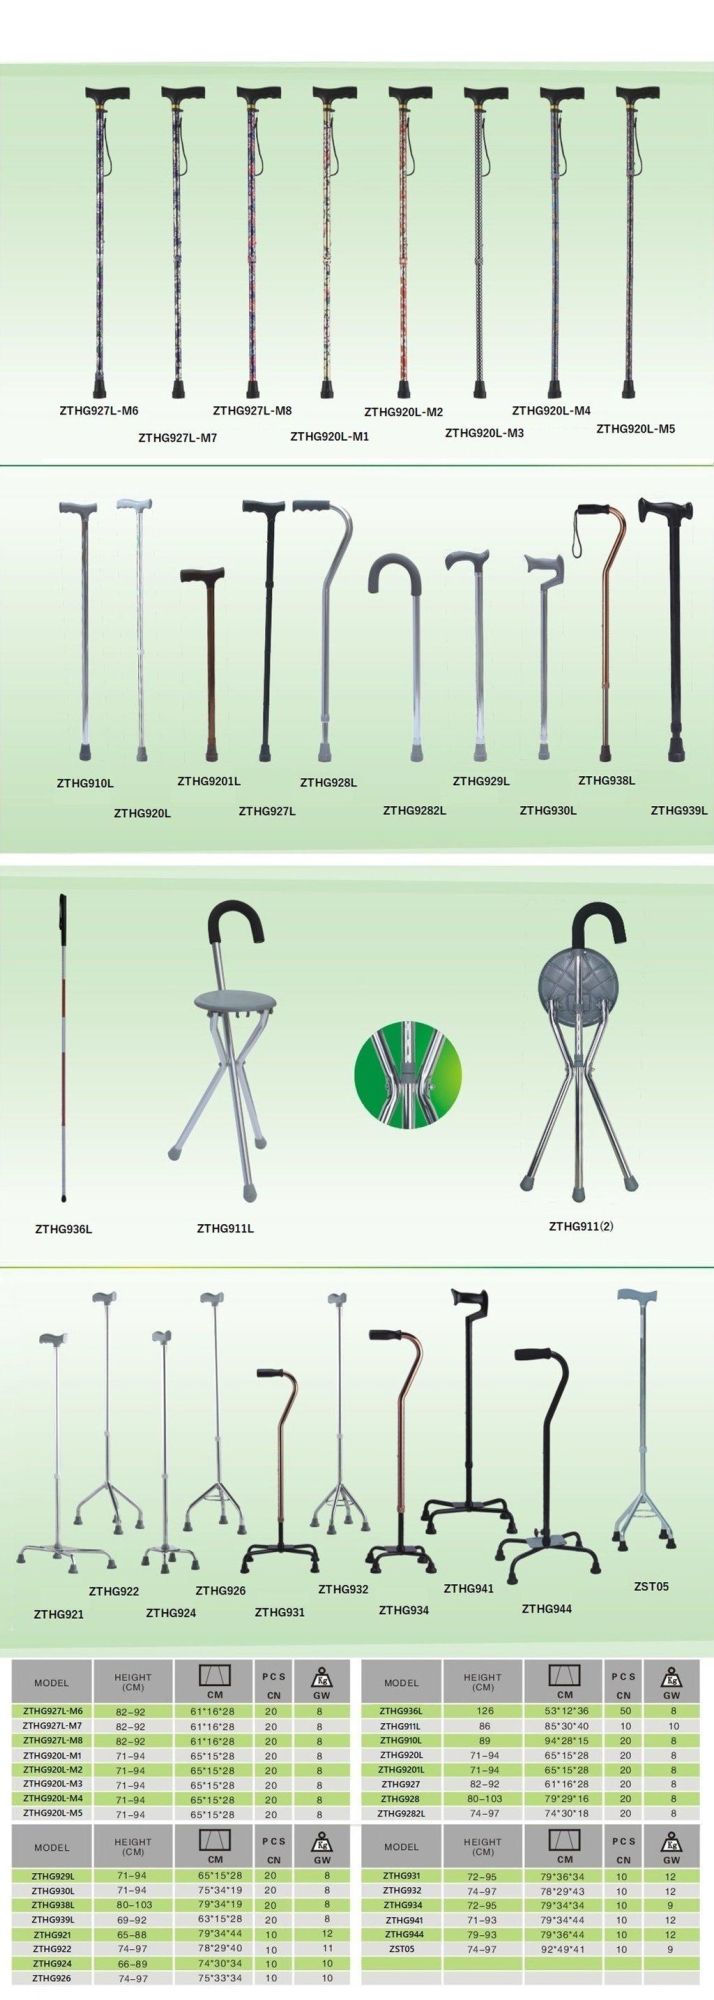 4 Legs Non-Slip Foot Pad Safety Outdoor Lightweight Walking Stick Multi Style Aluminum Adjustable Height Rehabilitation Crutch for Disabled/Elderly People